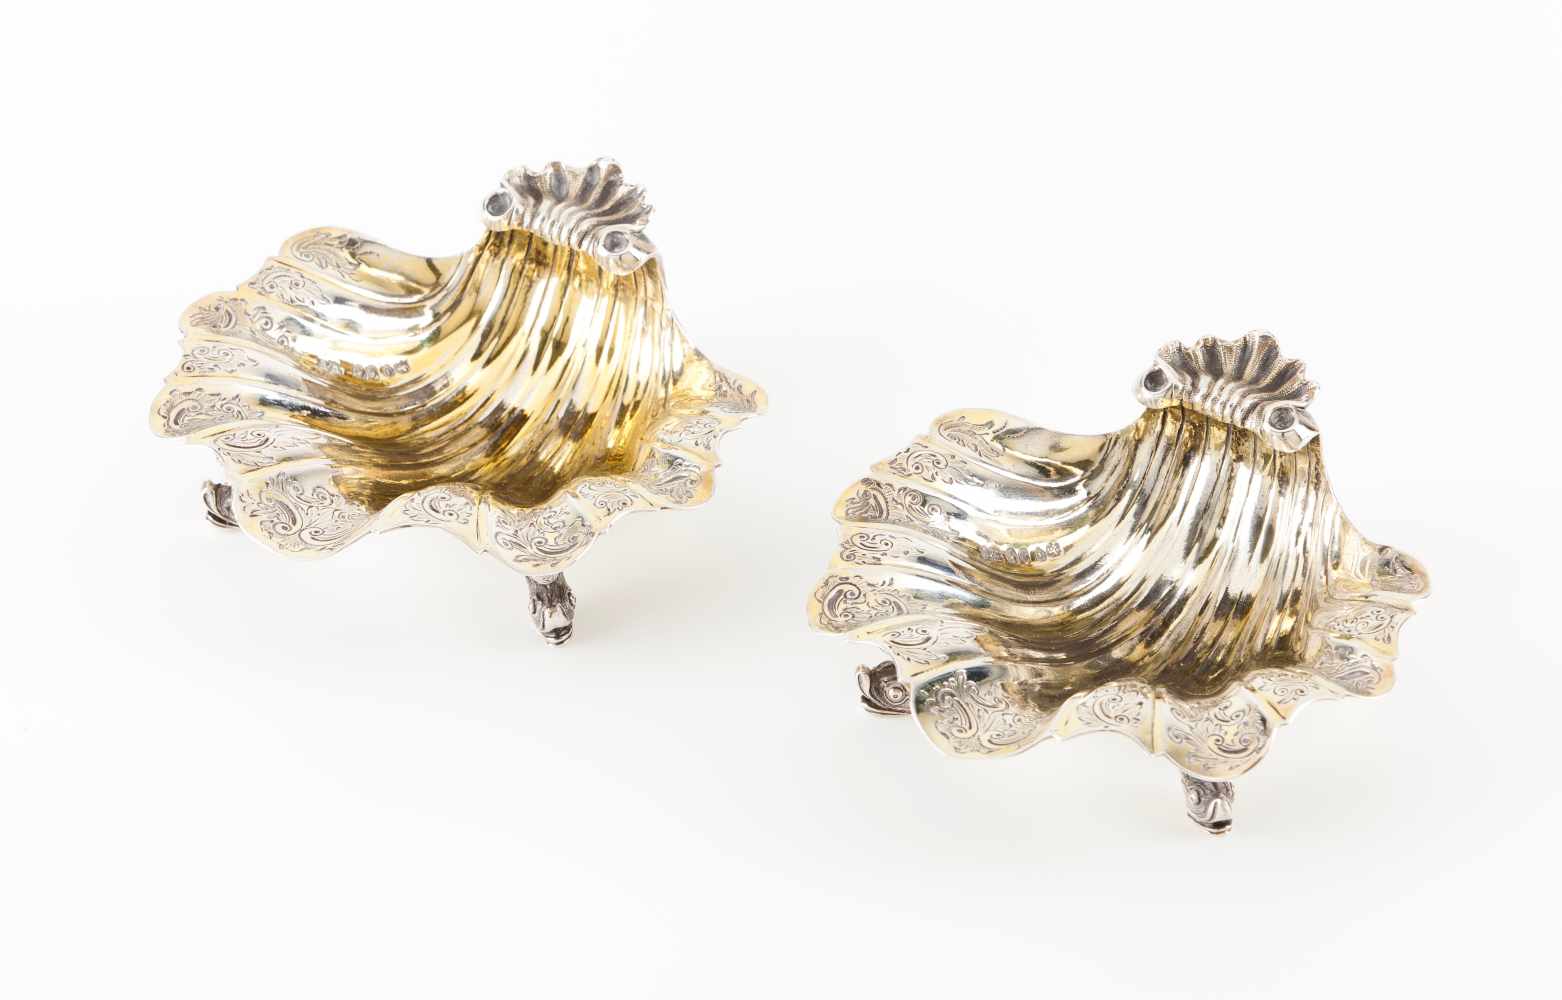 A pair of Victorian shellsEnglish silver, realistically cast and chiselled with volutes and foliage.